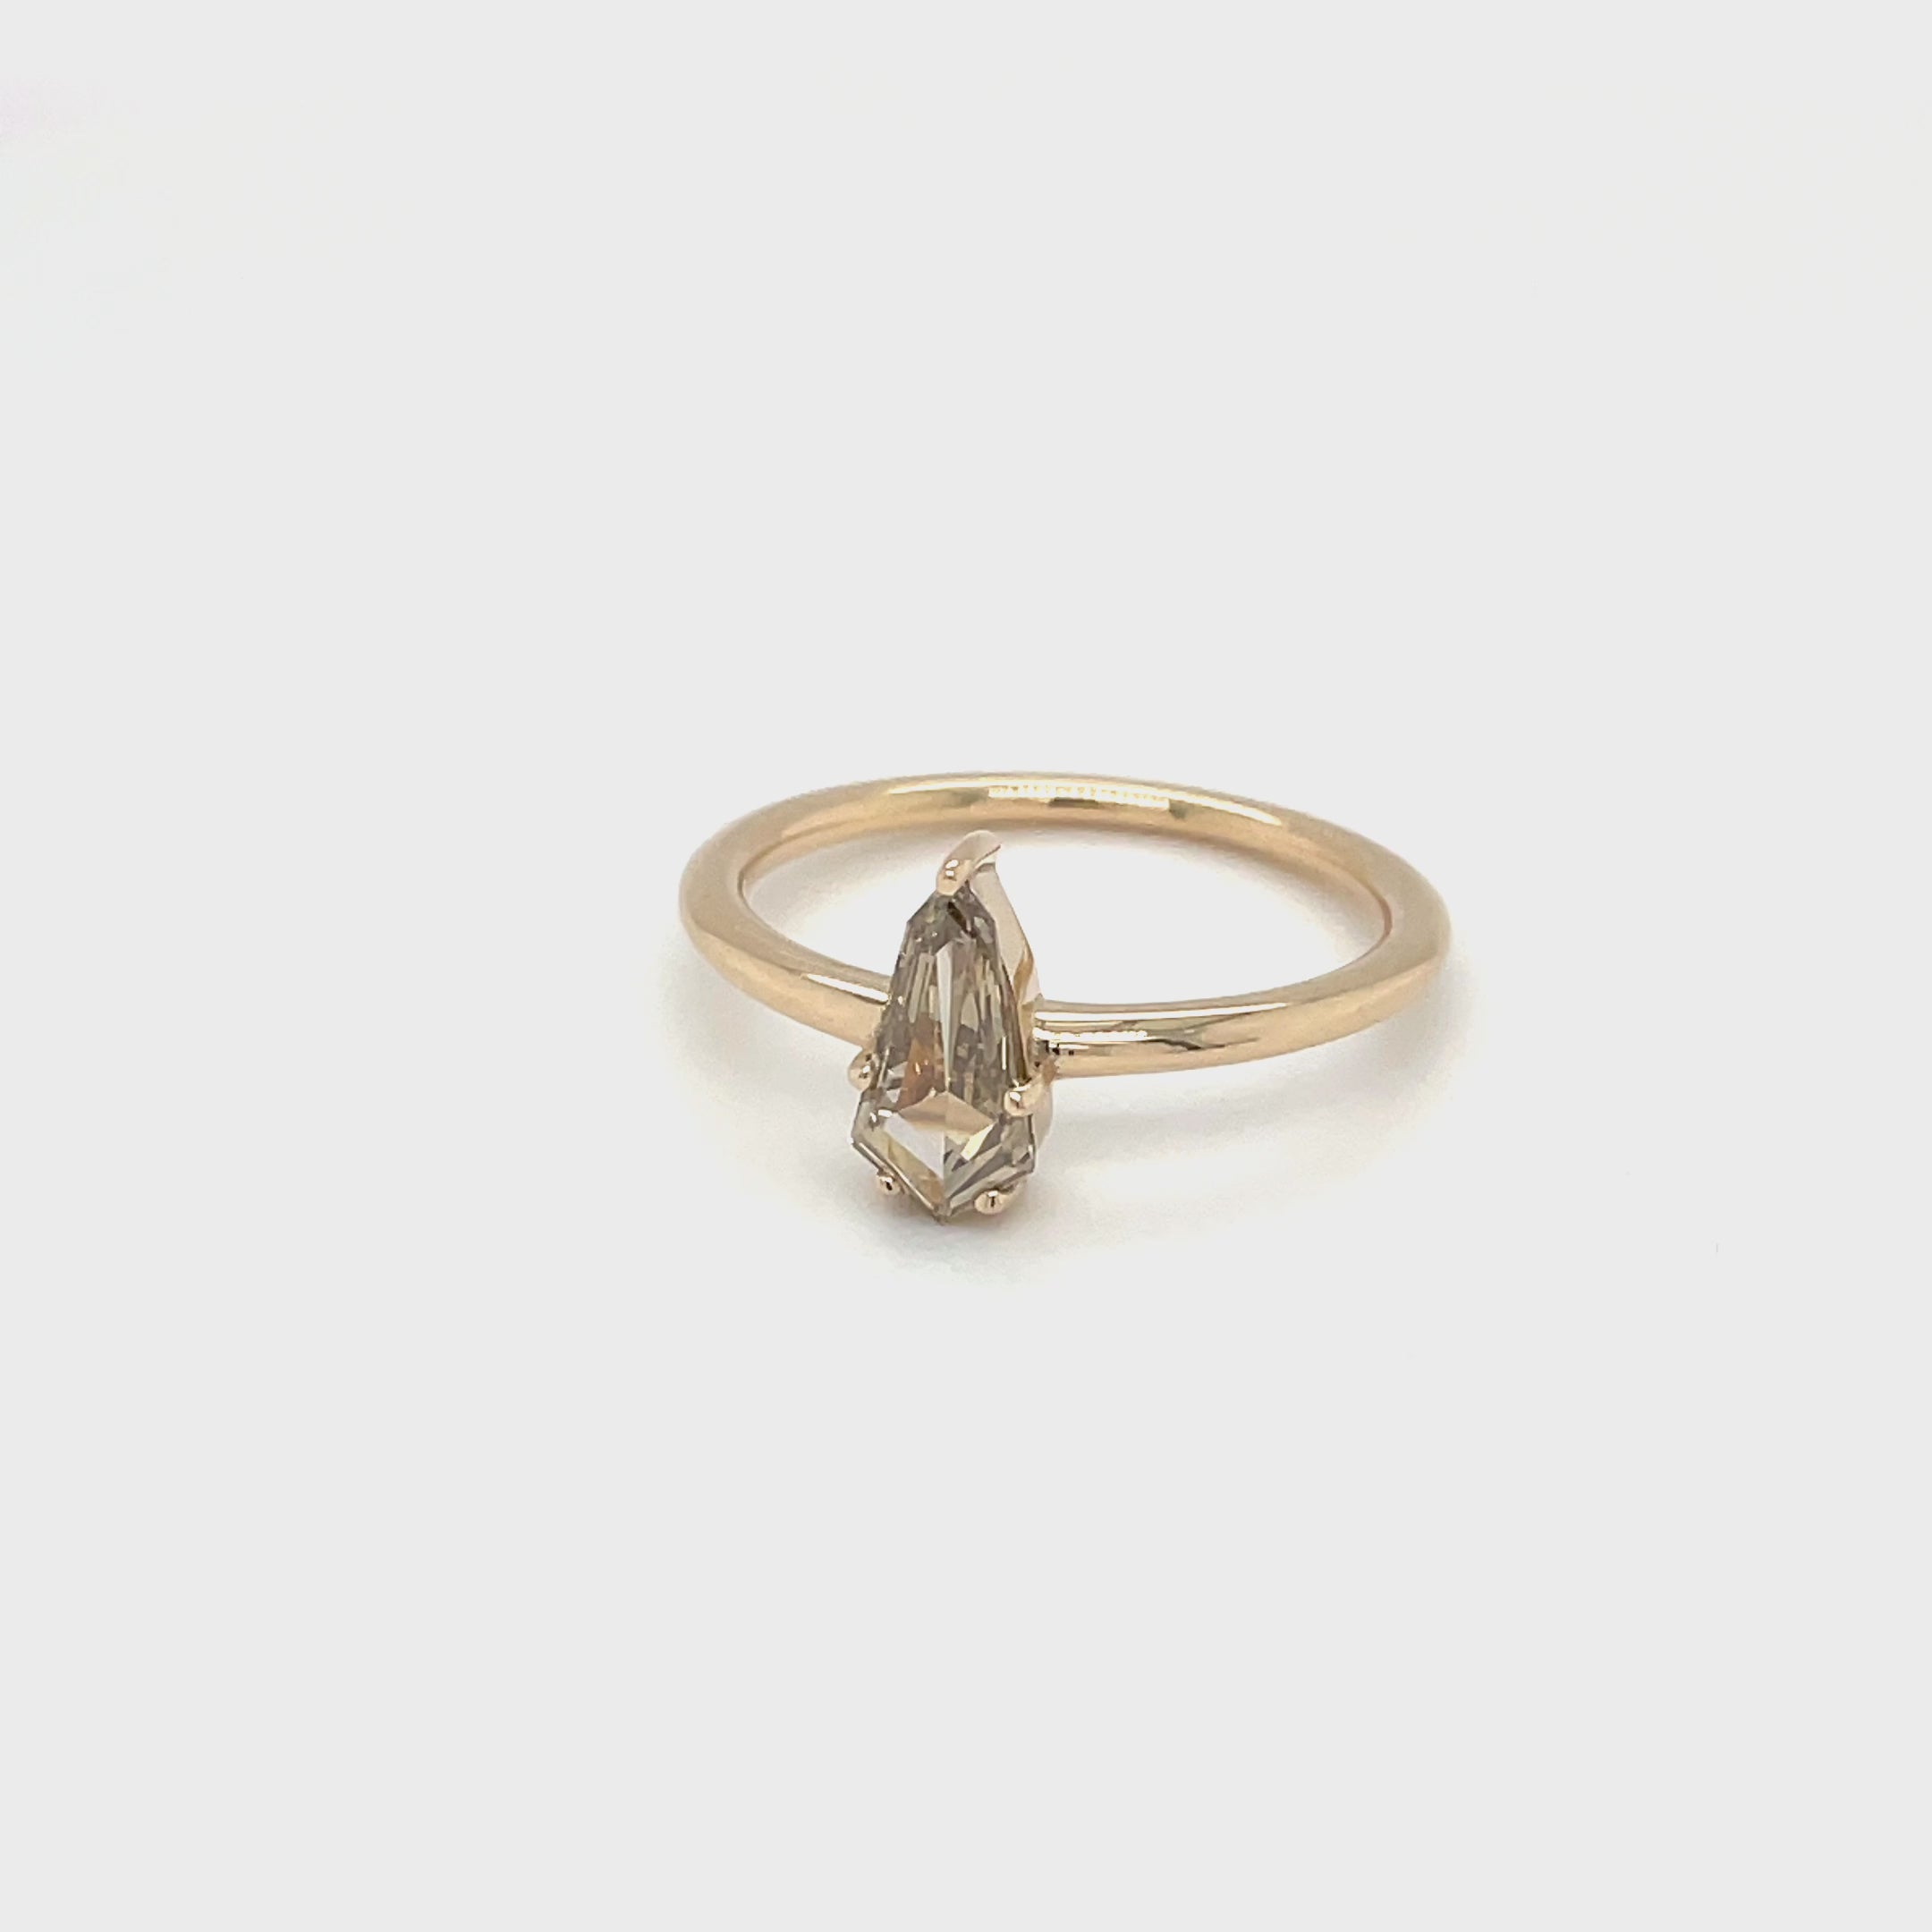 Kite shape rose cut champagne diamond in yellow gold with thin simple band